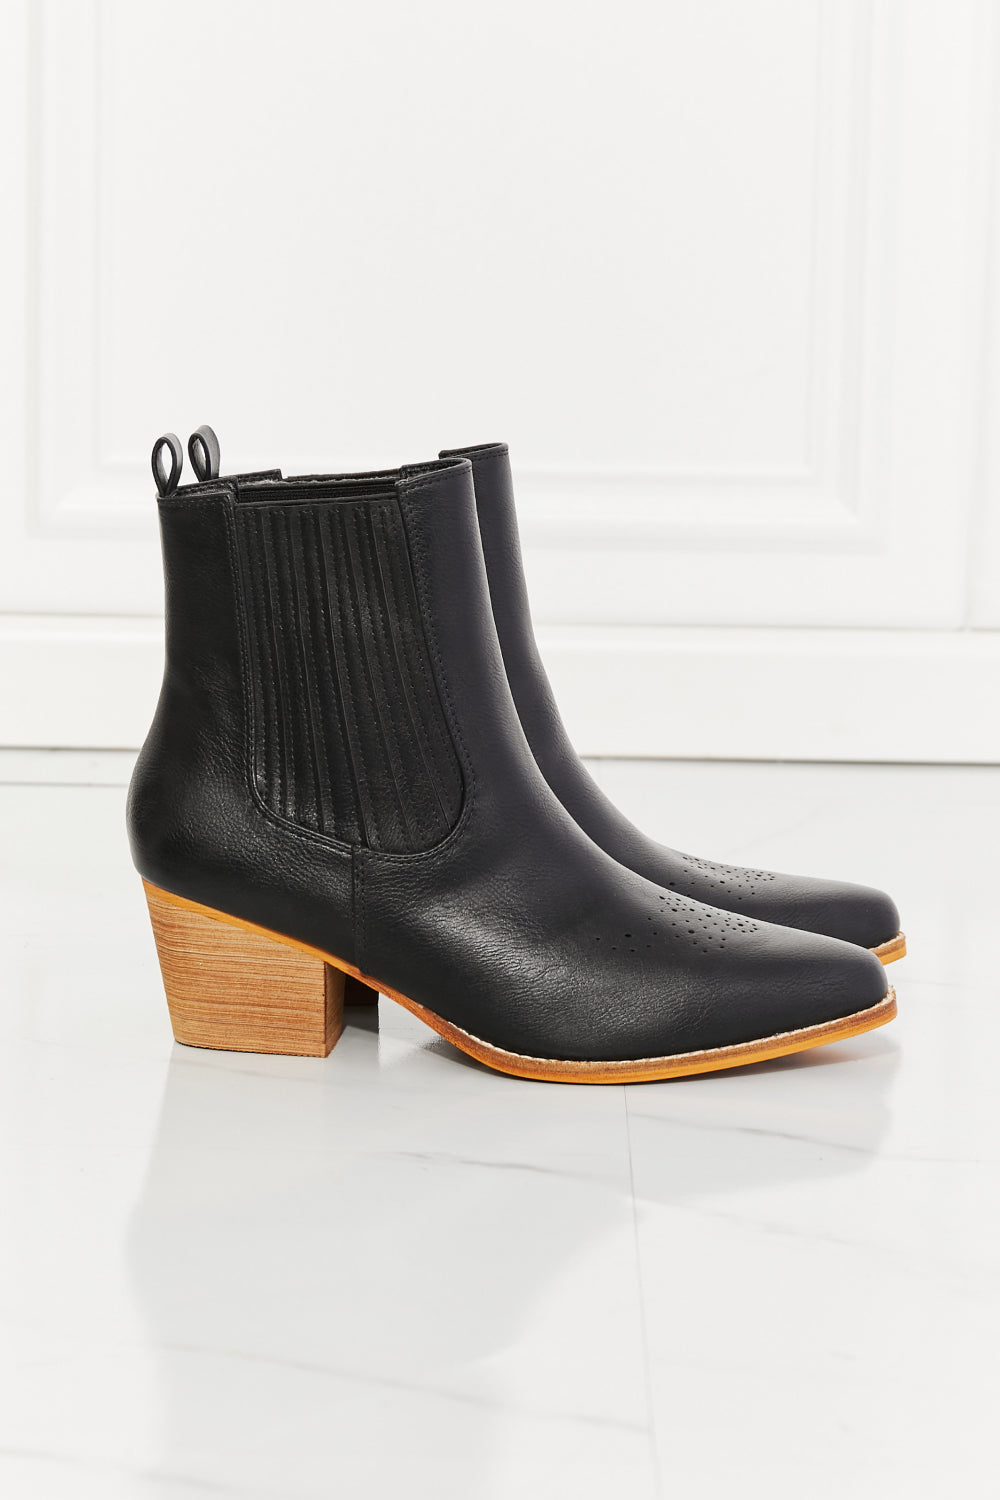 MMShoes Stacked Heel Cowboy Style Chelsea Ankle Bootie Boots in Black Love the Journey